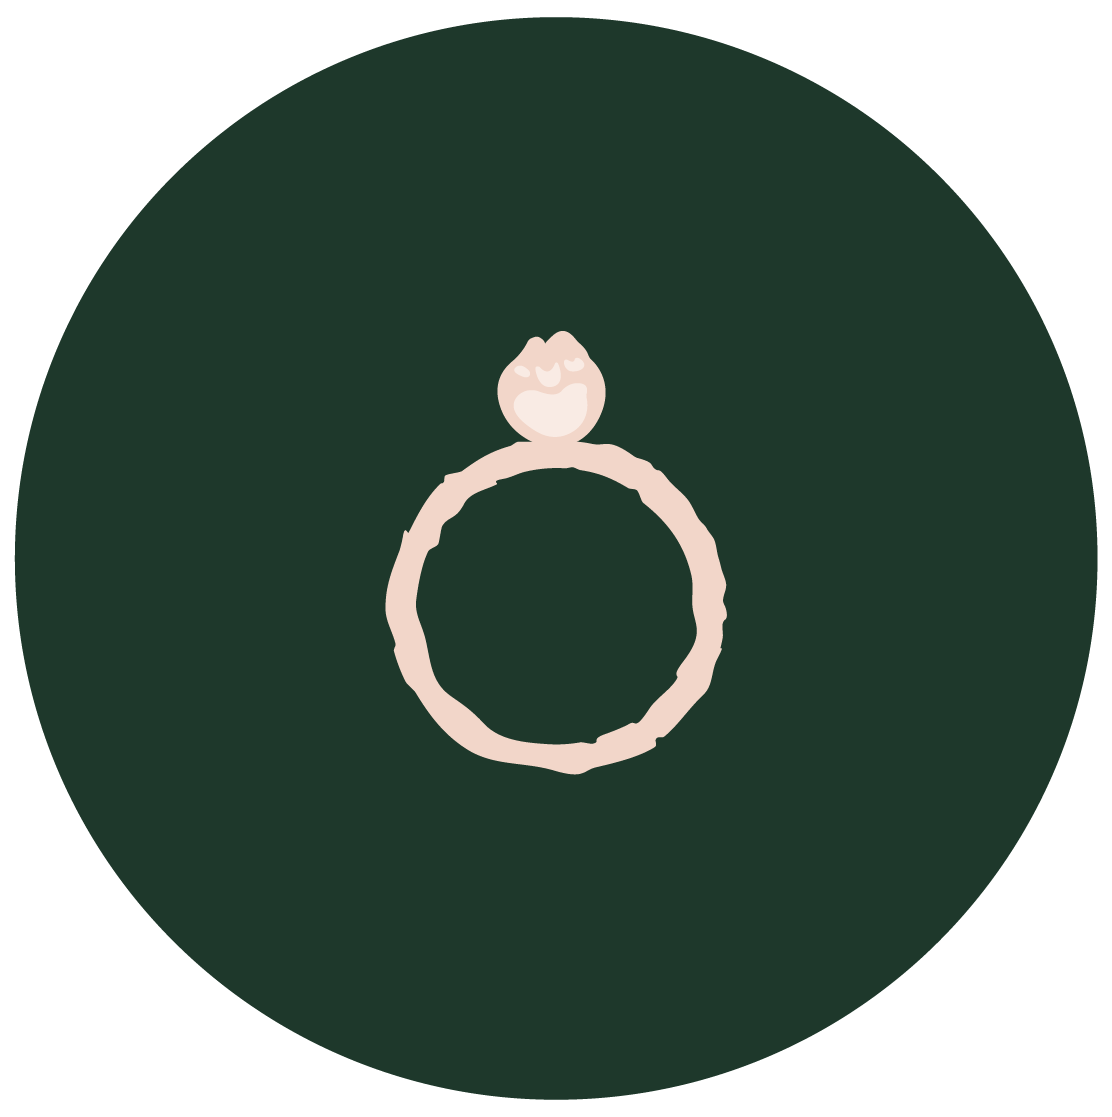 Feature Ring - Create